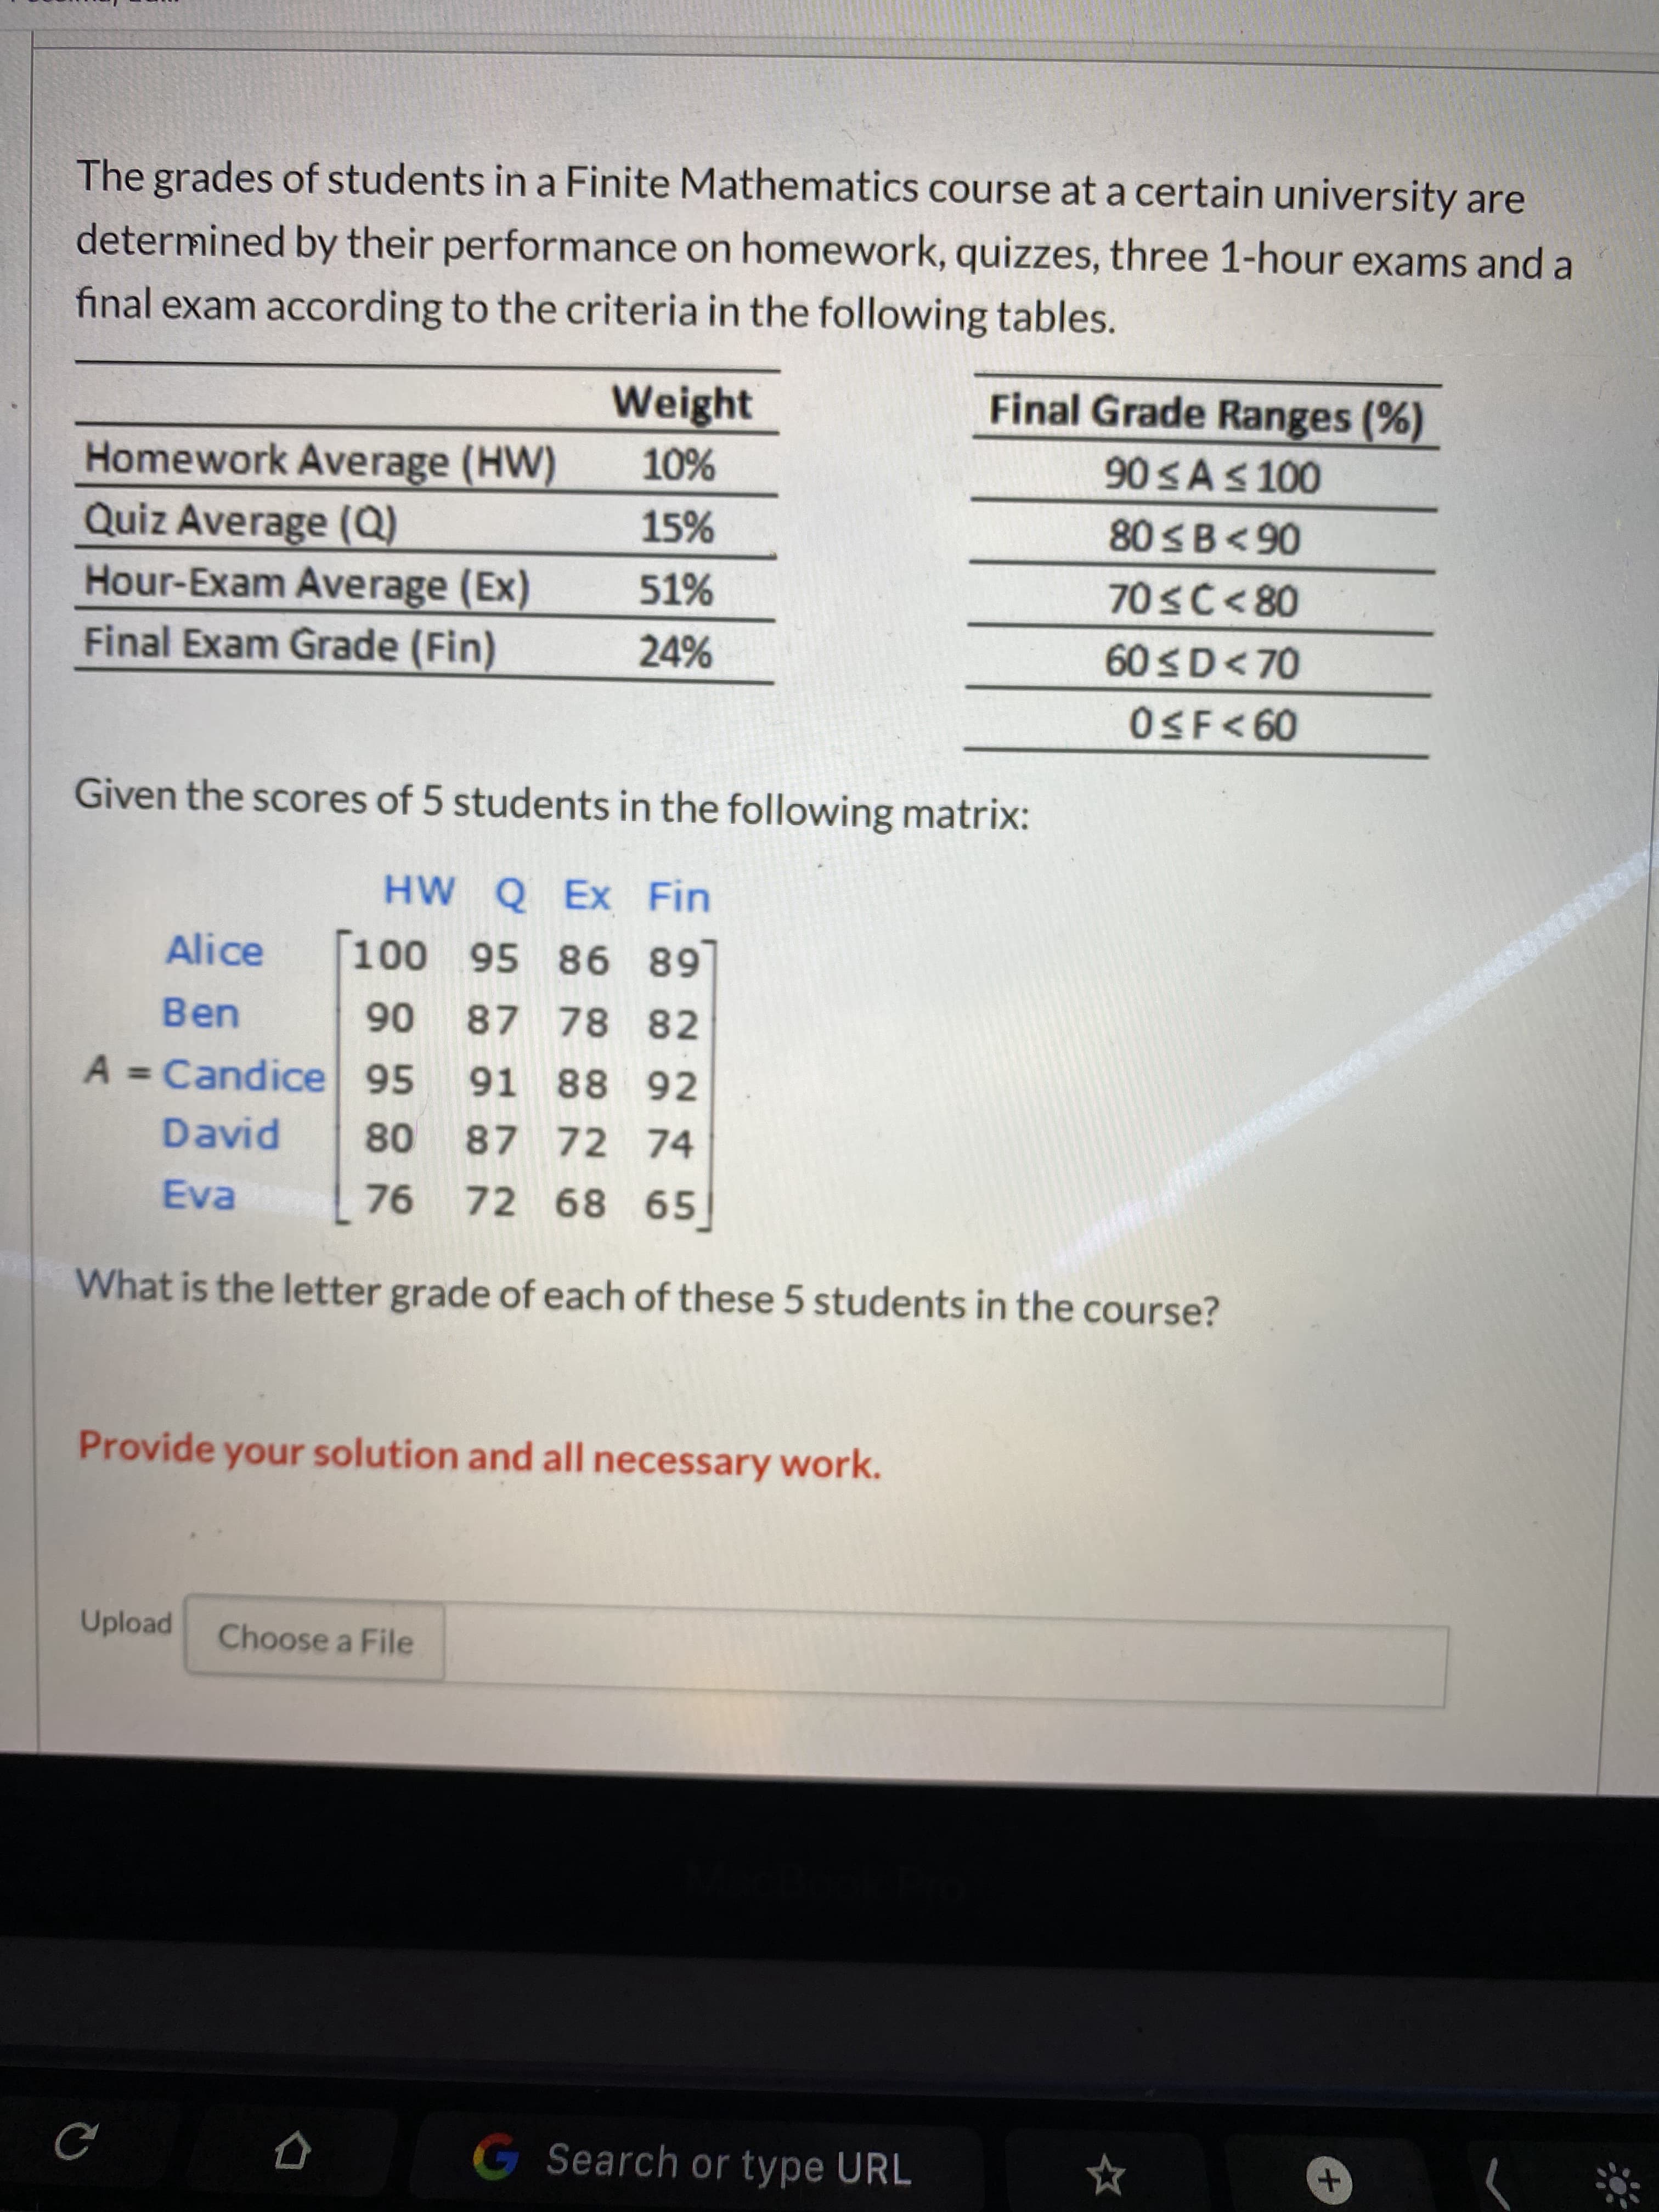 The grades of students in a Finite Mathematics course at a certain university are
determined by their performance on homework, quizzes, three 1-hour exams and a
final exam according to the criteria in the following tables.
